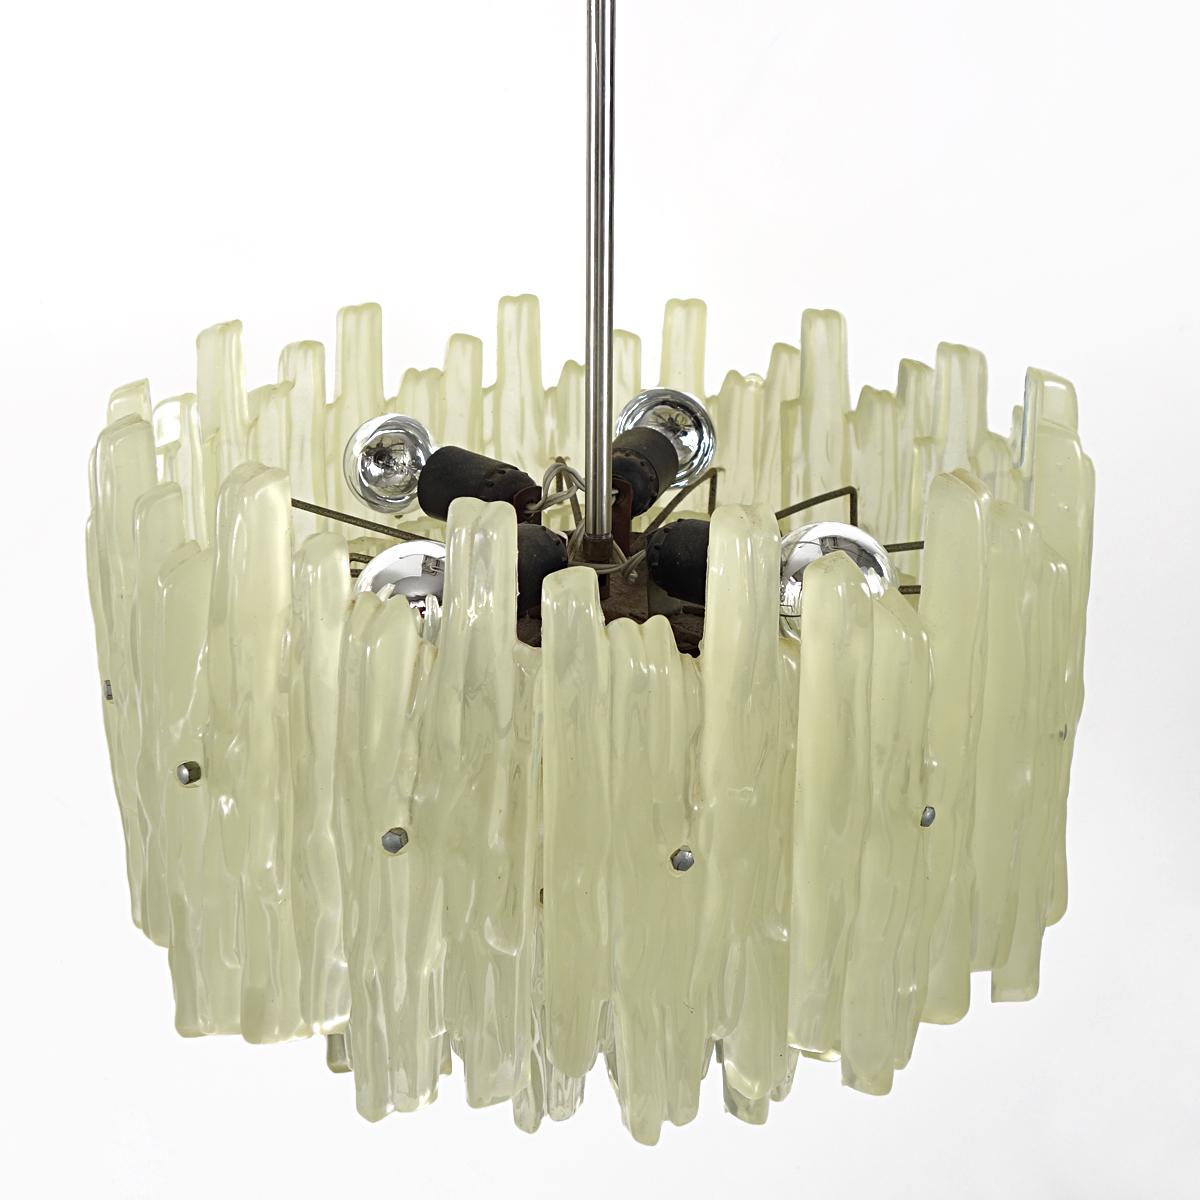 Majestic three stories high J.T. Kalmar chandelier or pendant with frosted glass icicles made of irregularly shaped plexiglass. They hang in a chrome frame. 
Four light sources provide for attractive lighting.
Height of the shade is 49 cm / 19.5